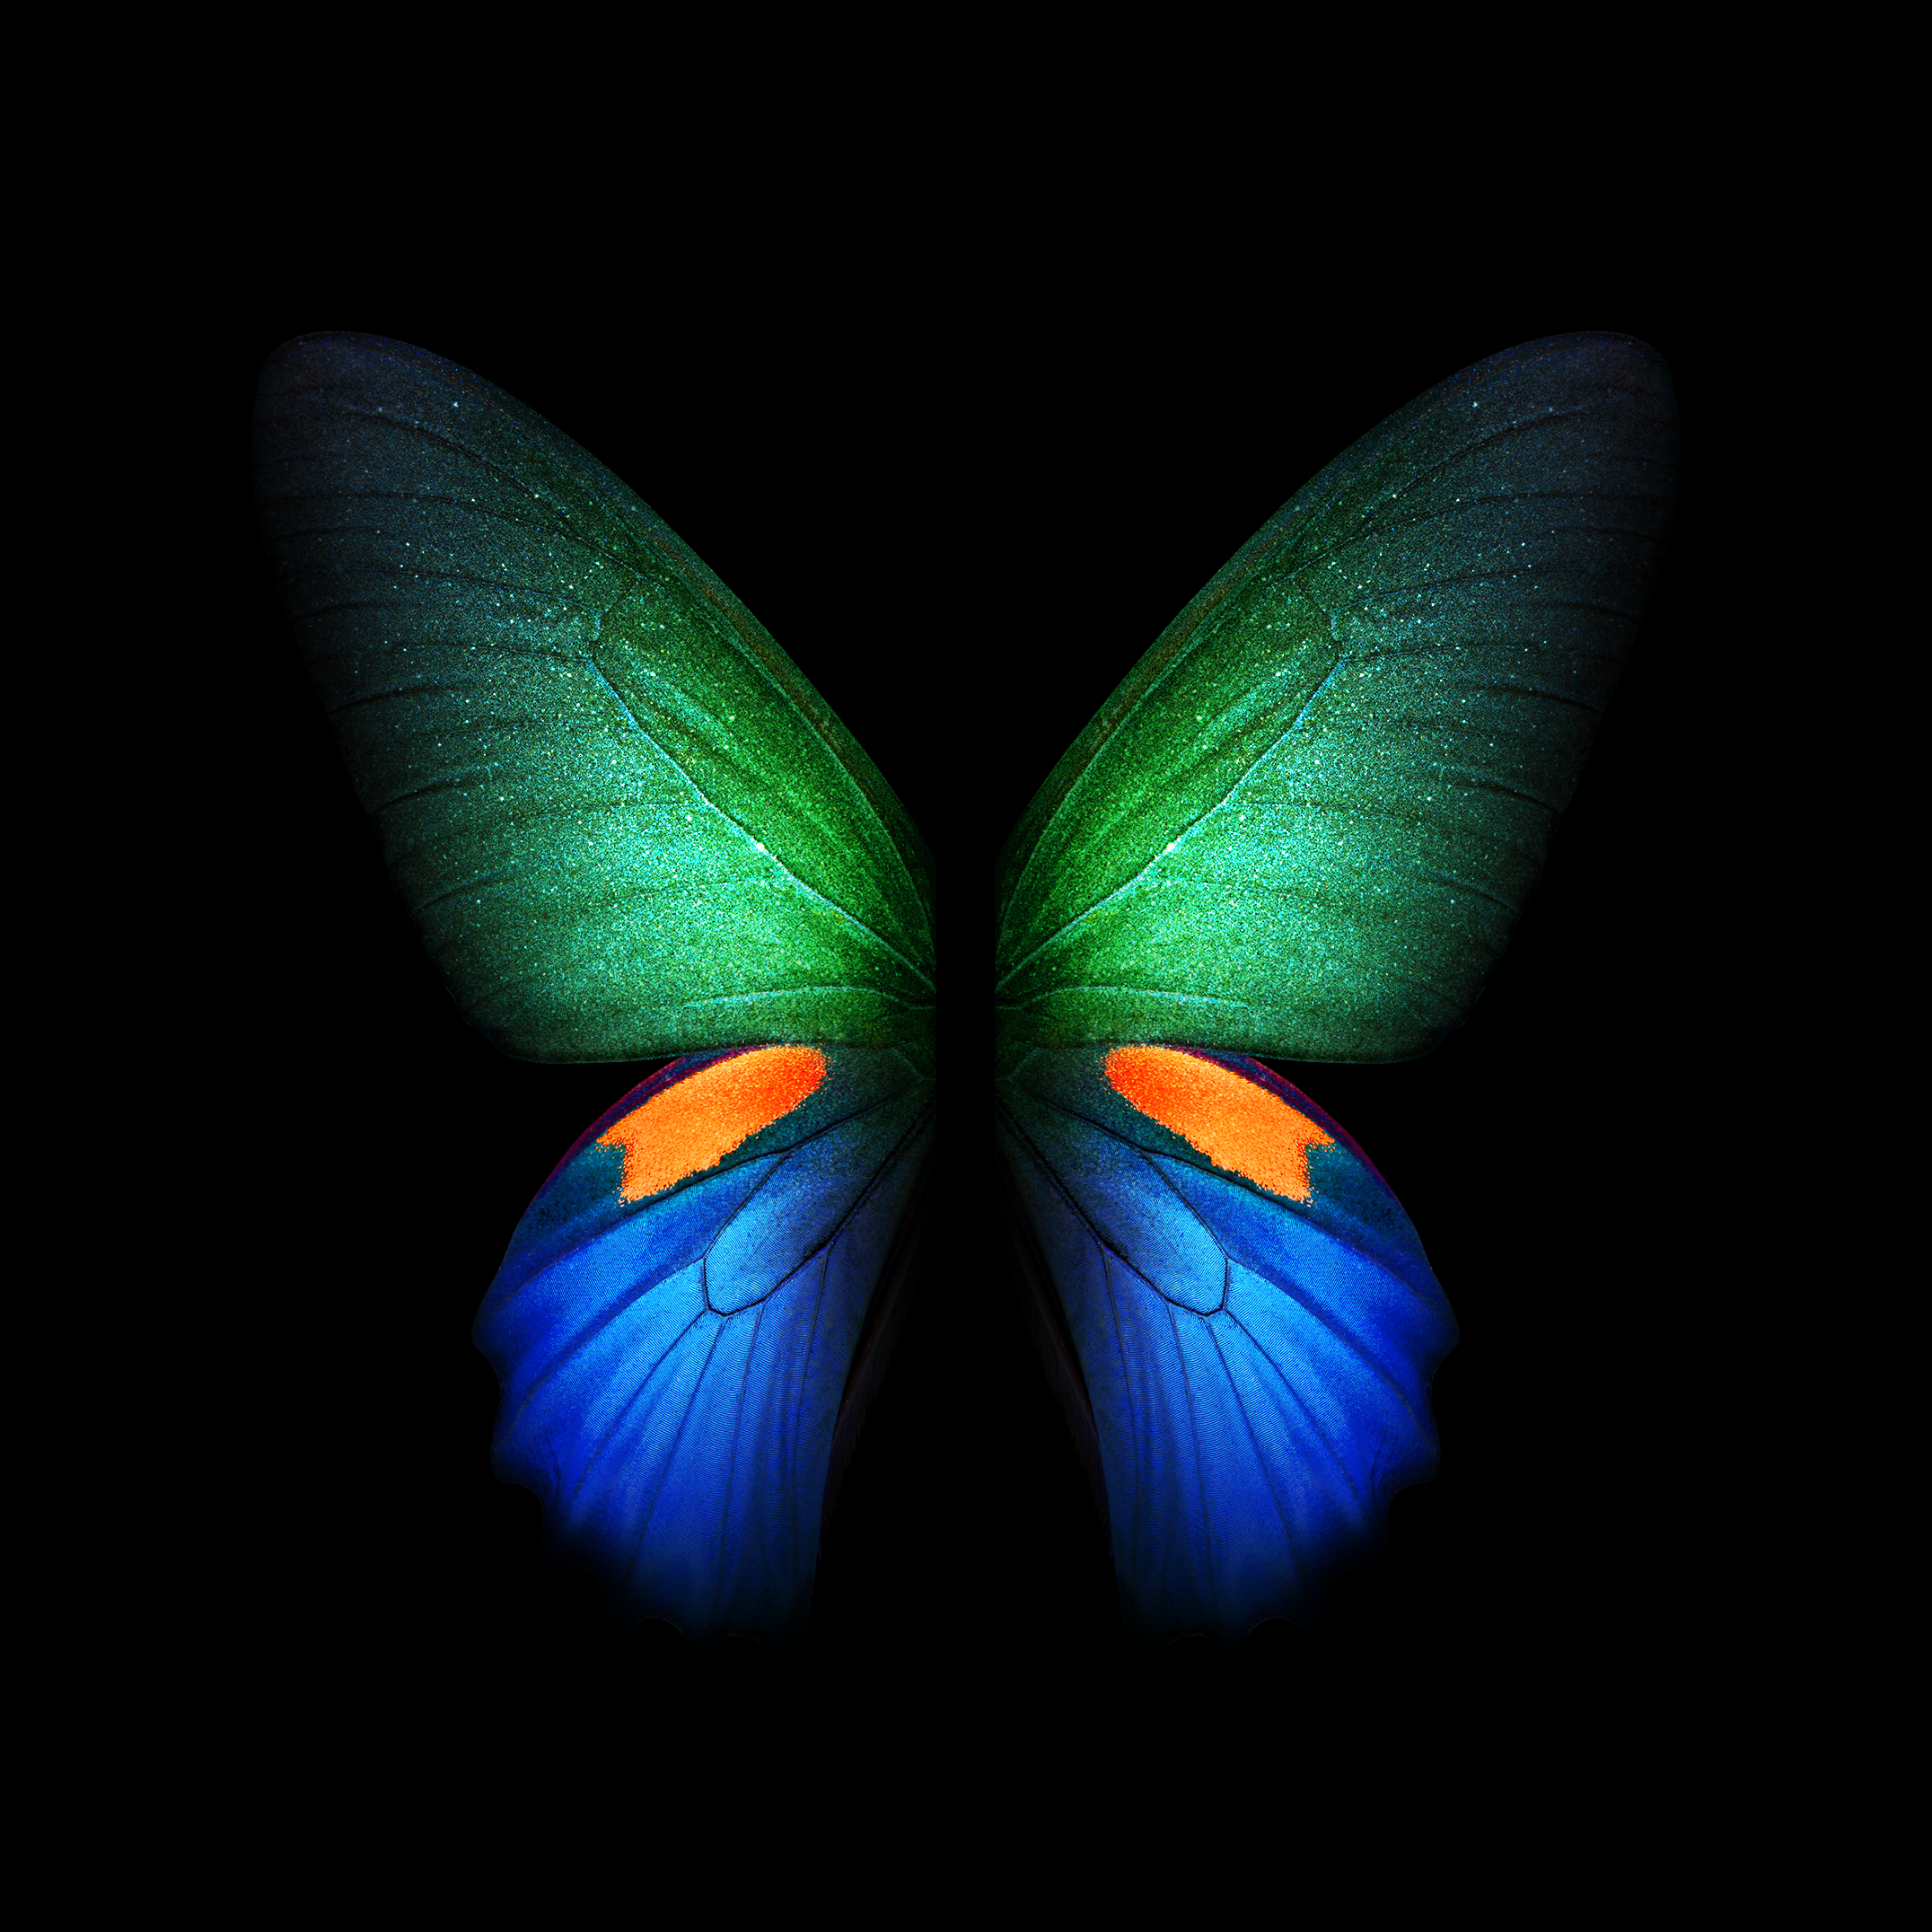 Samsung Galaxy Fold Live And Static Wallpaper Available For